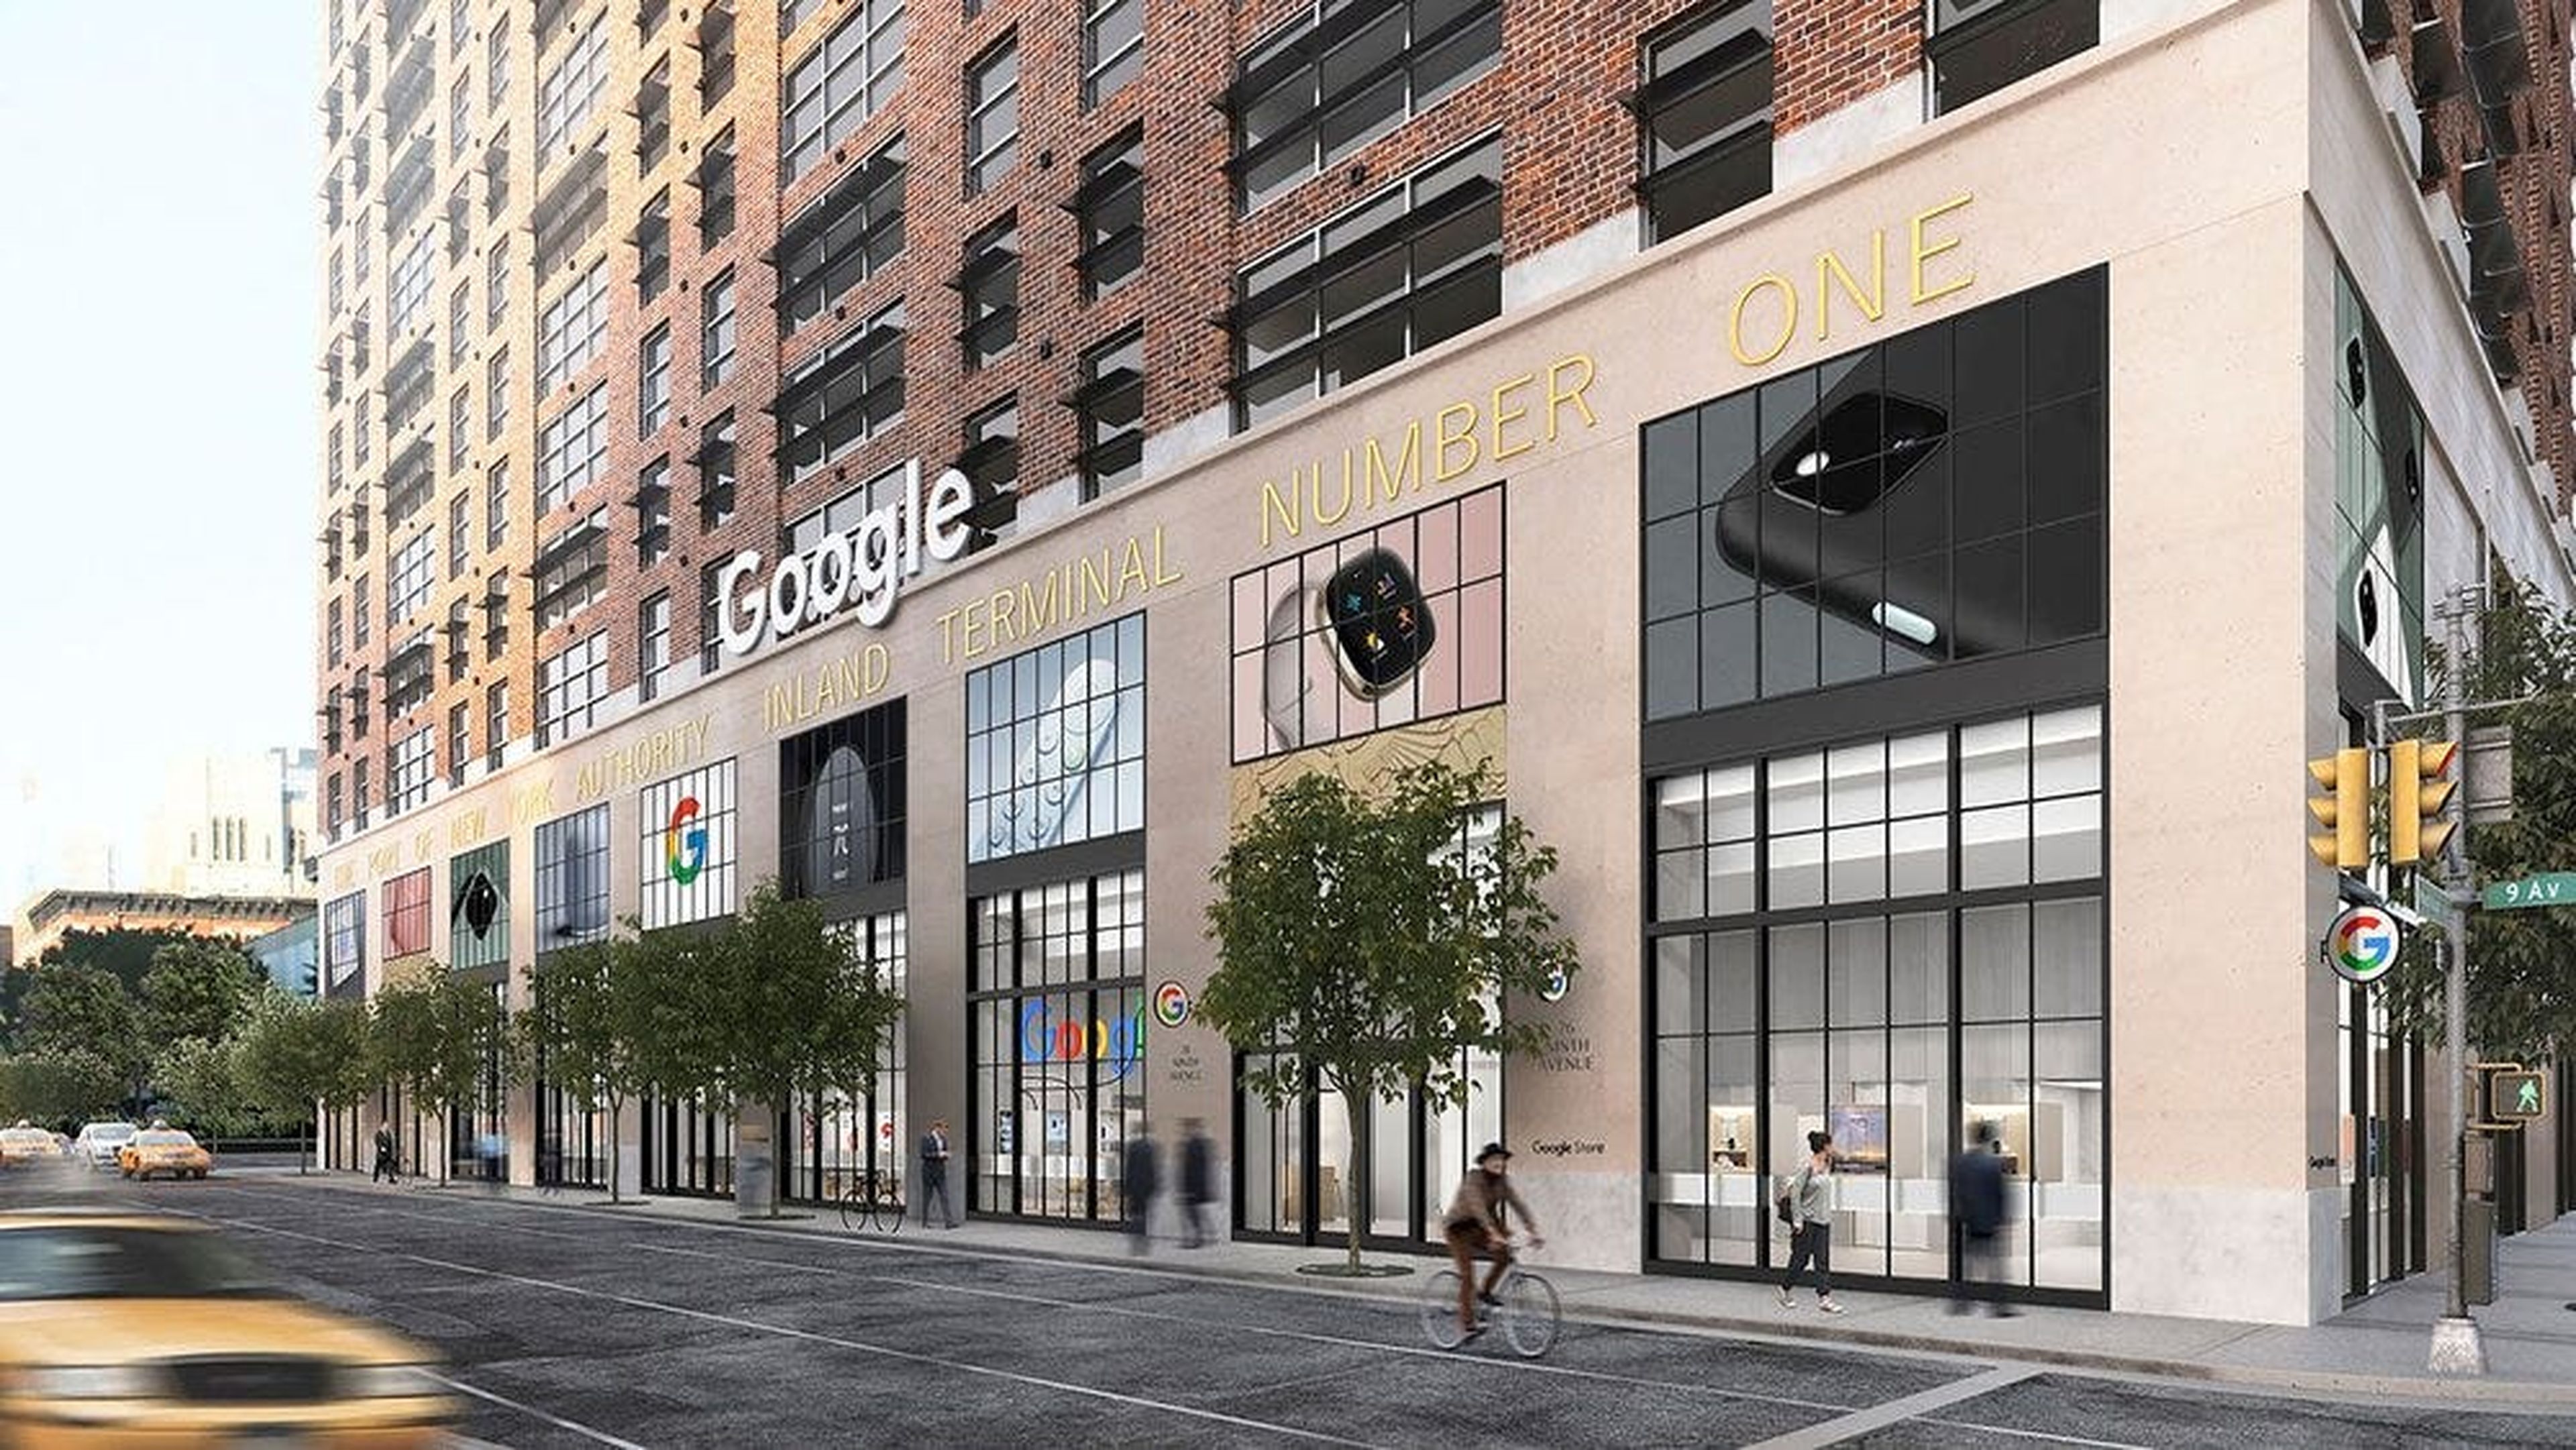 Google says its first permanent retail store will open this summer.